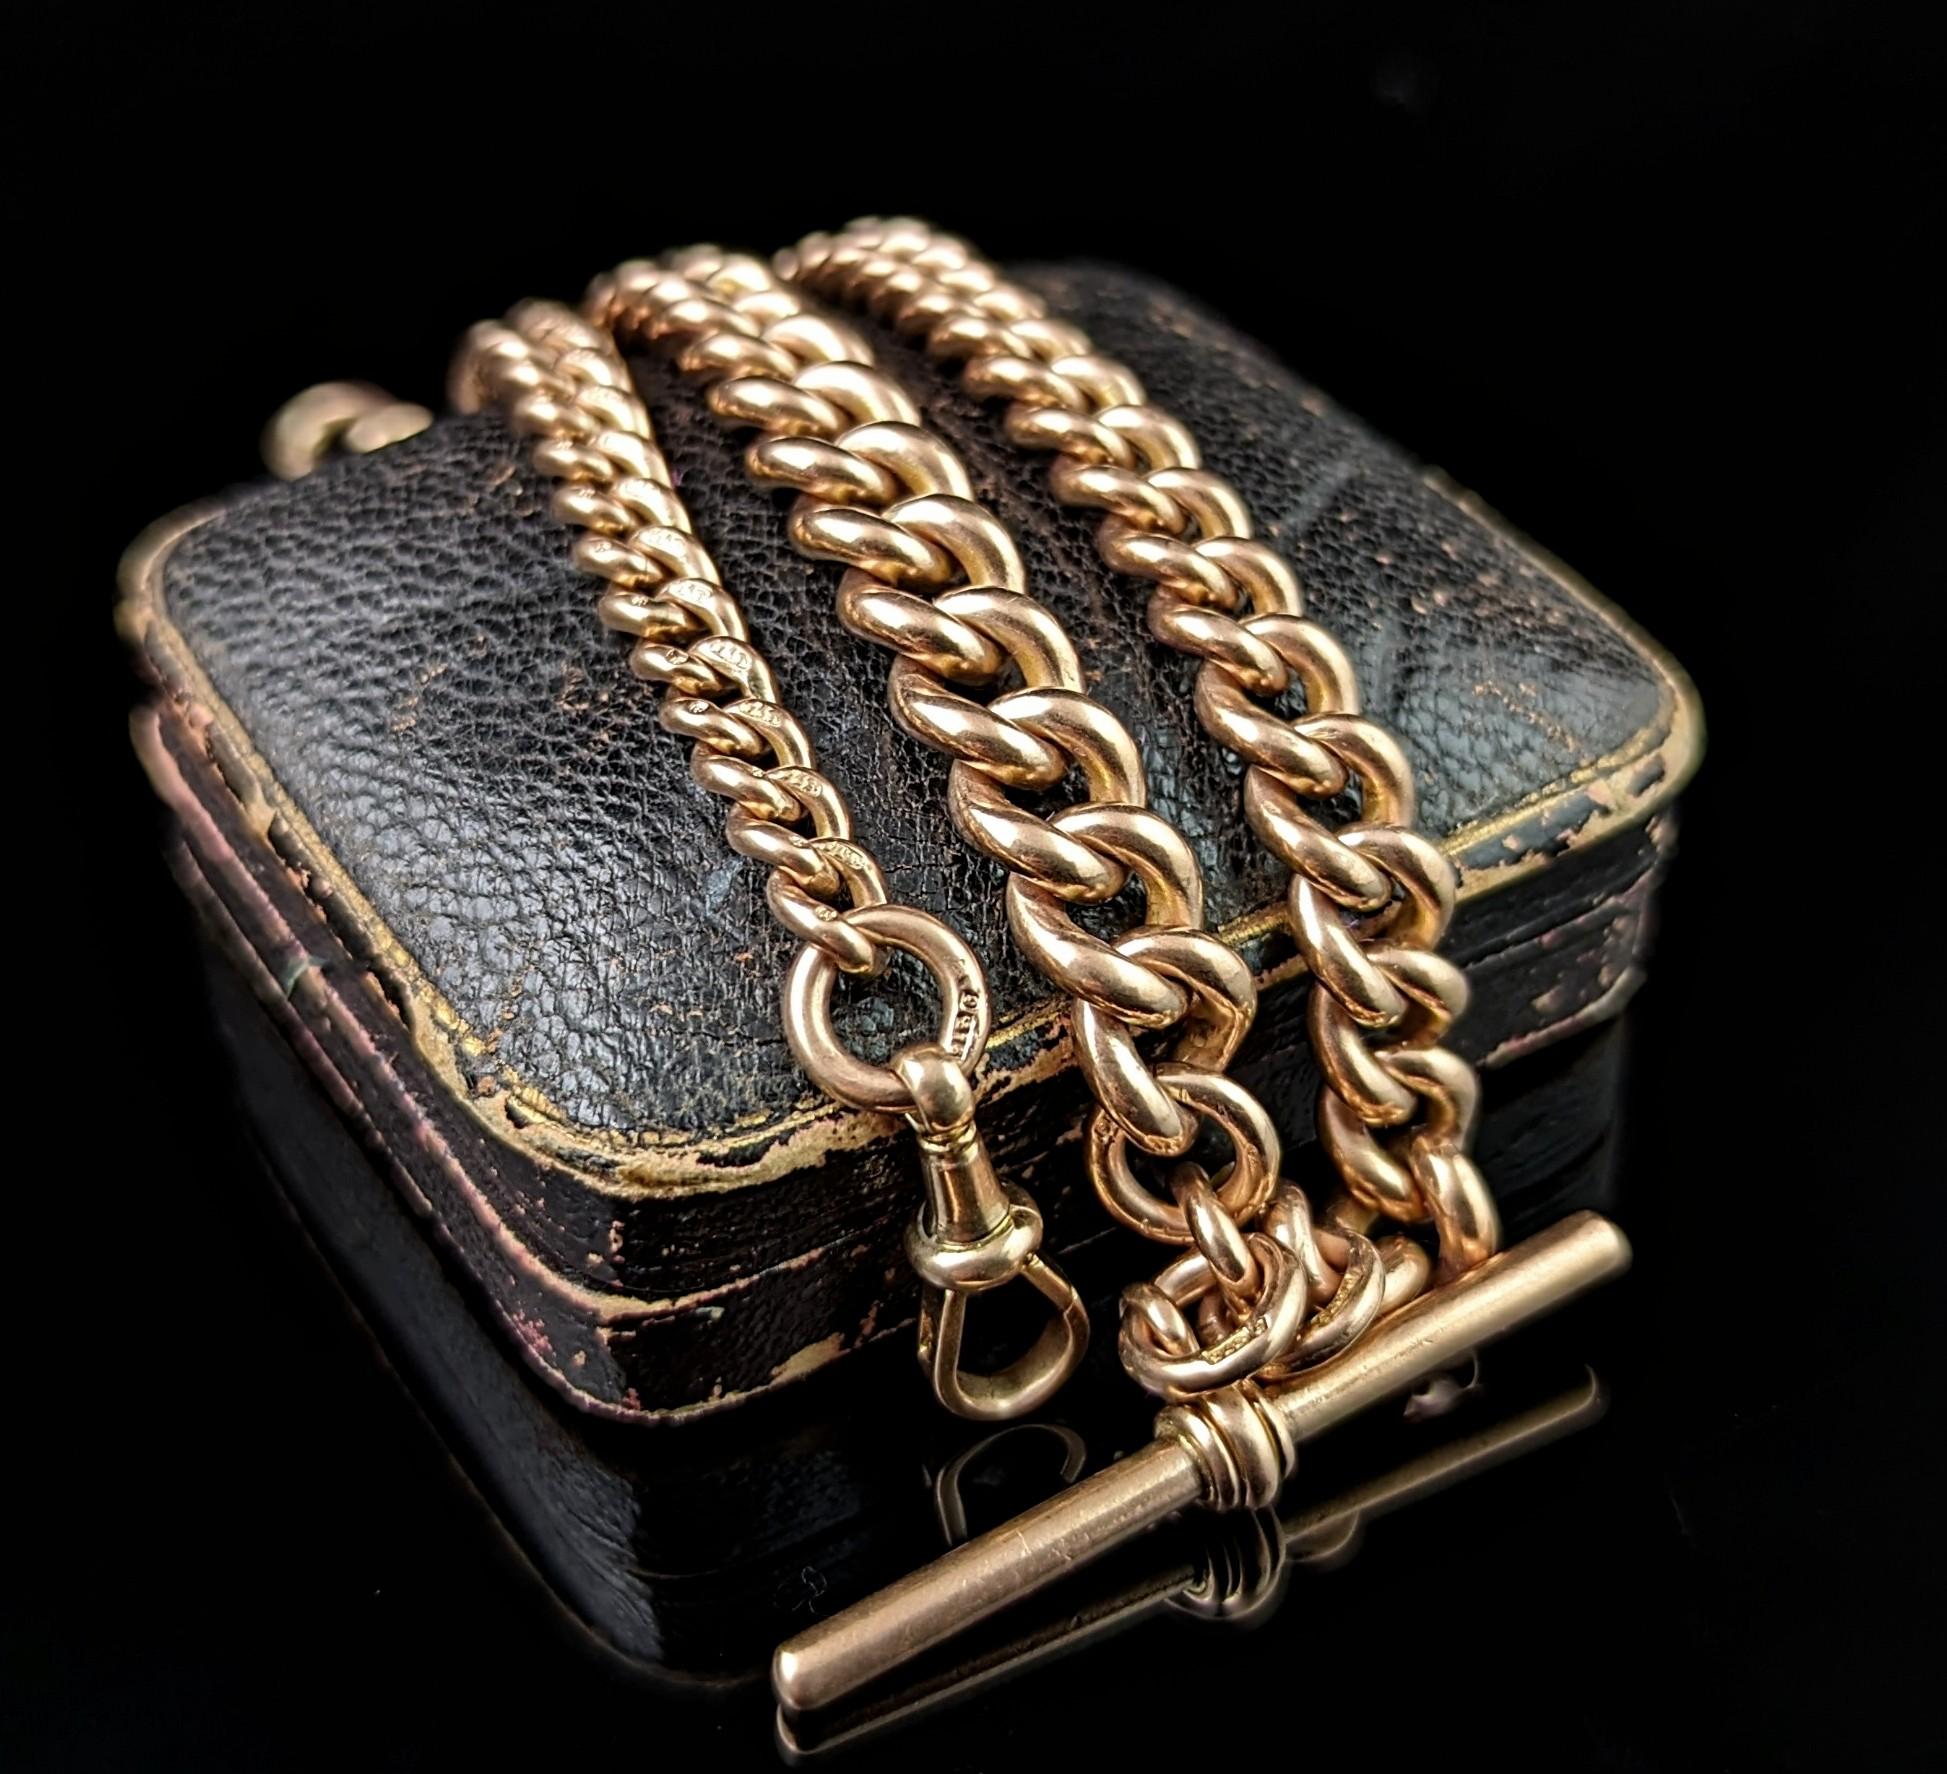 Antique 9k gold double Albert chain, watch chain necklace, Heavy  For Sale 7